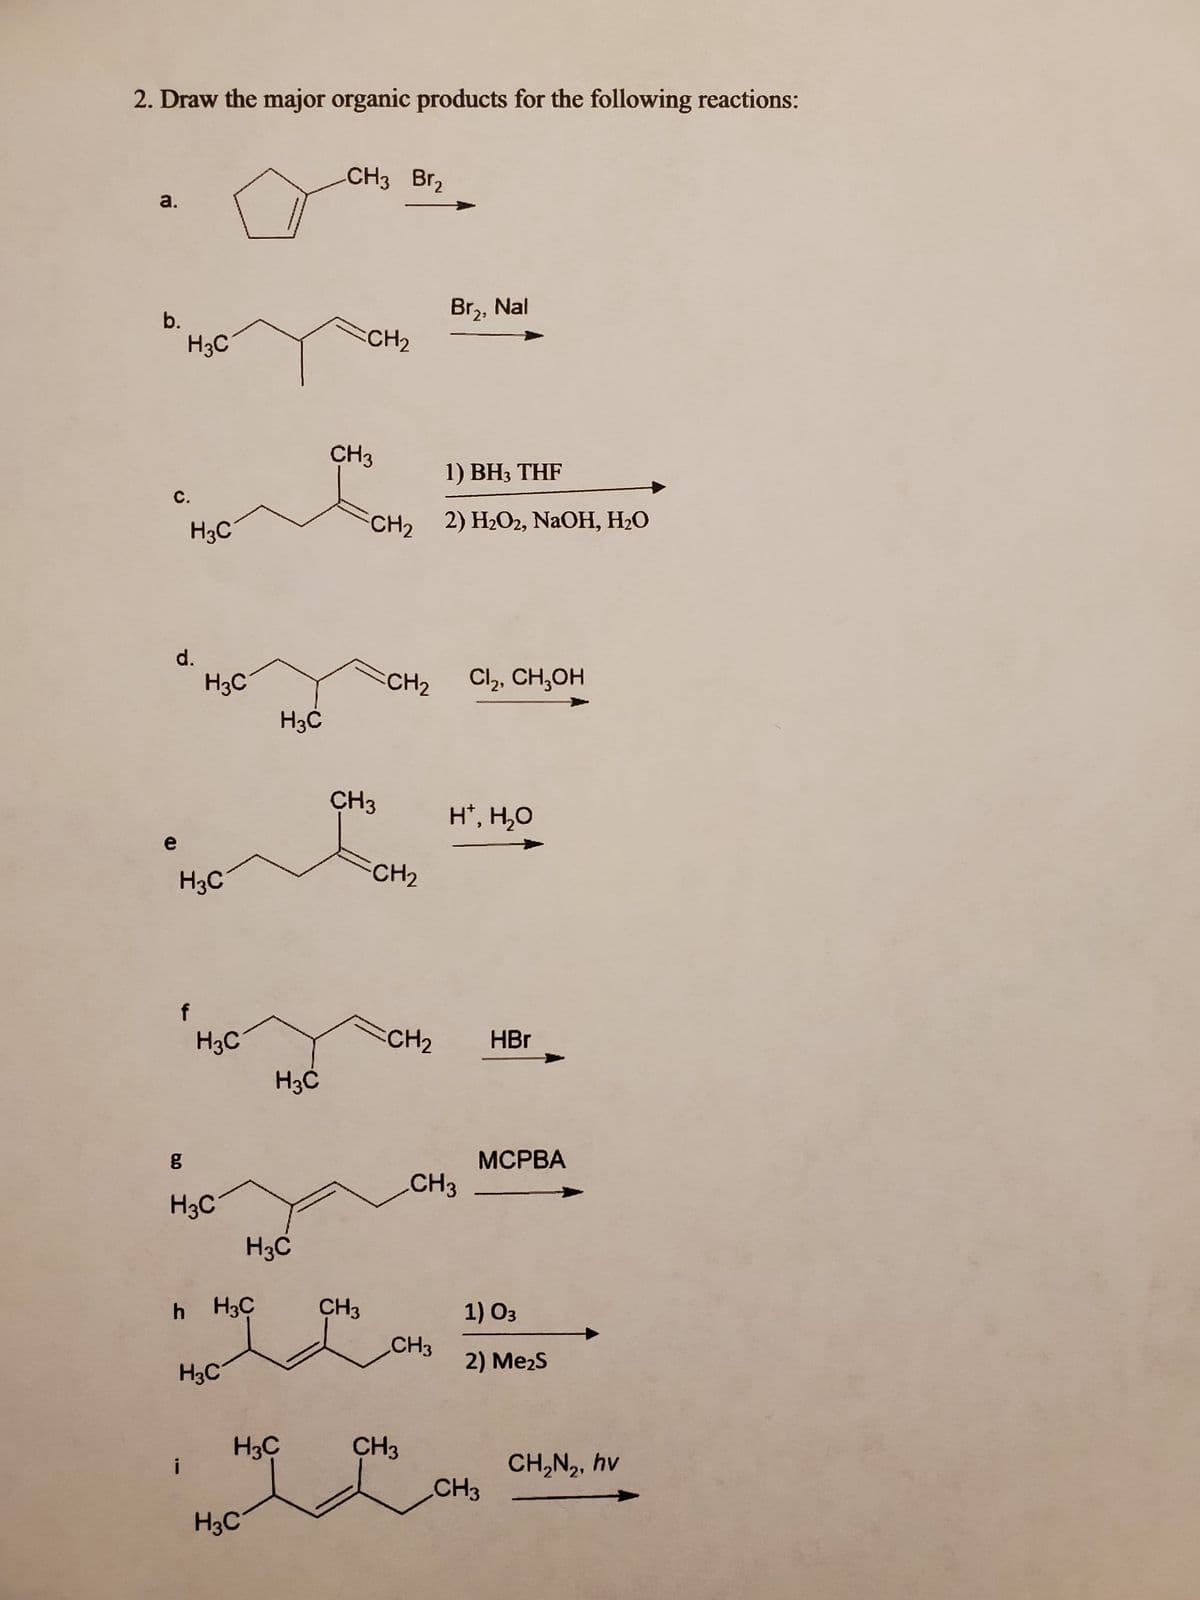 2. Draw the major organic products for the following reactions:
a.
b.
H3C
с.
H3C
d.
H3C
H3C
H3C
g
H3C
h H3C
H3C
H3C
H3C
H3C
H3C
H3C
CH3 Br₂
CH₂
CH3
CH3
CH3
1) BH3 THF
22 22, NaOH, H2O
CH₂ Cl₂, CH₂OH
CH₂
CH₂
Br₂, Nal
CH3
CH3
н, но
CH3
HBr
MCPBA
1) 03
2) MezS
CH3
CH,N,, hv